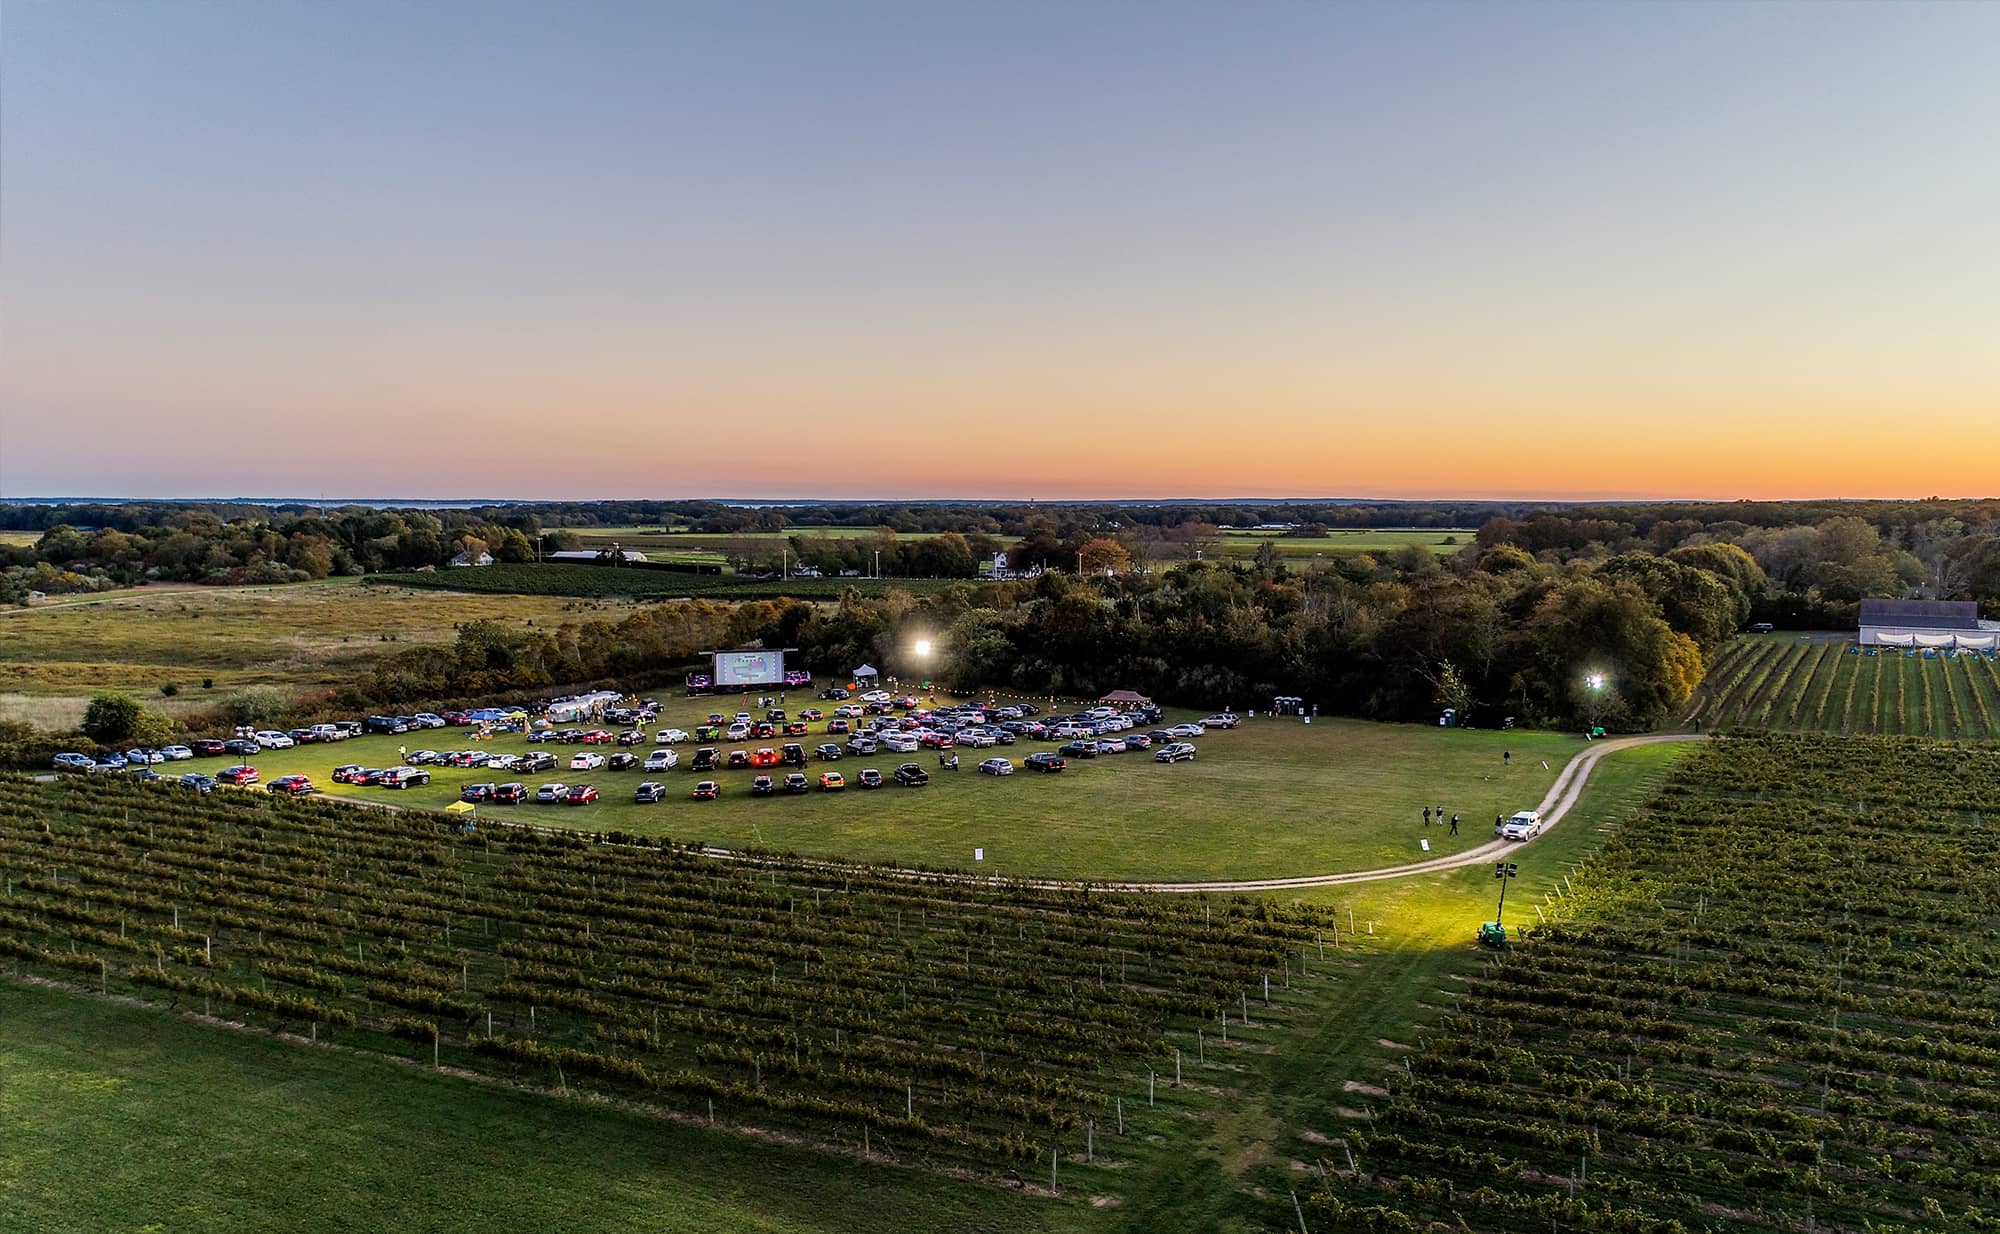 Landscape of North Fork TV Festival in beautiful field with movie screen and sun setting in the background